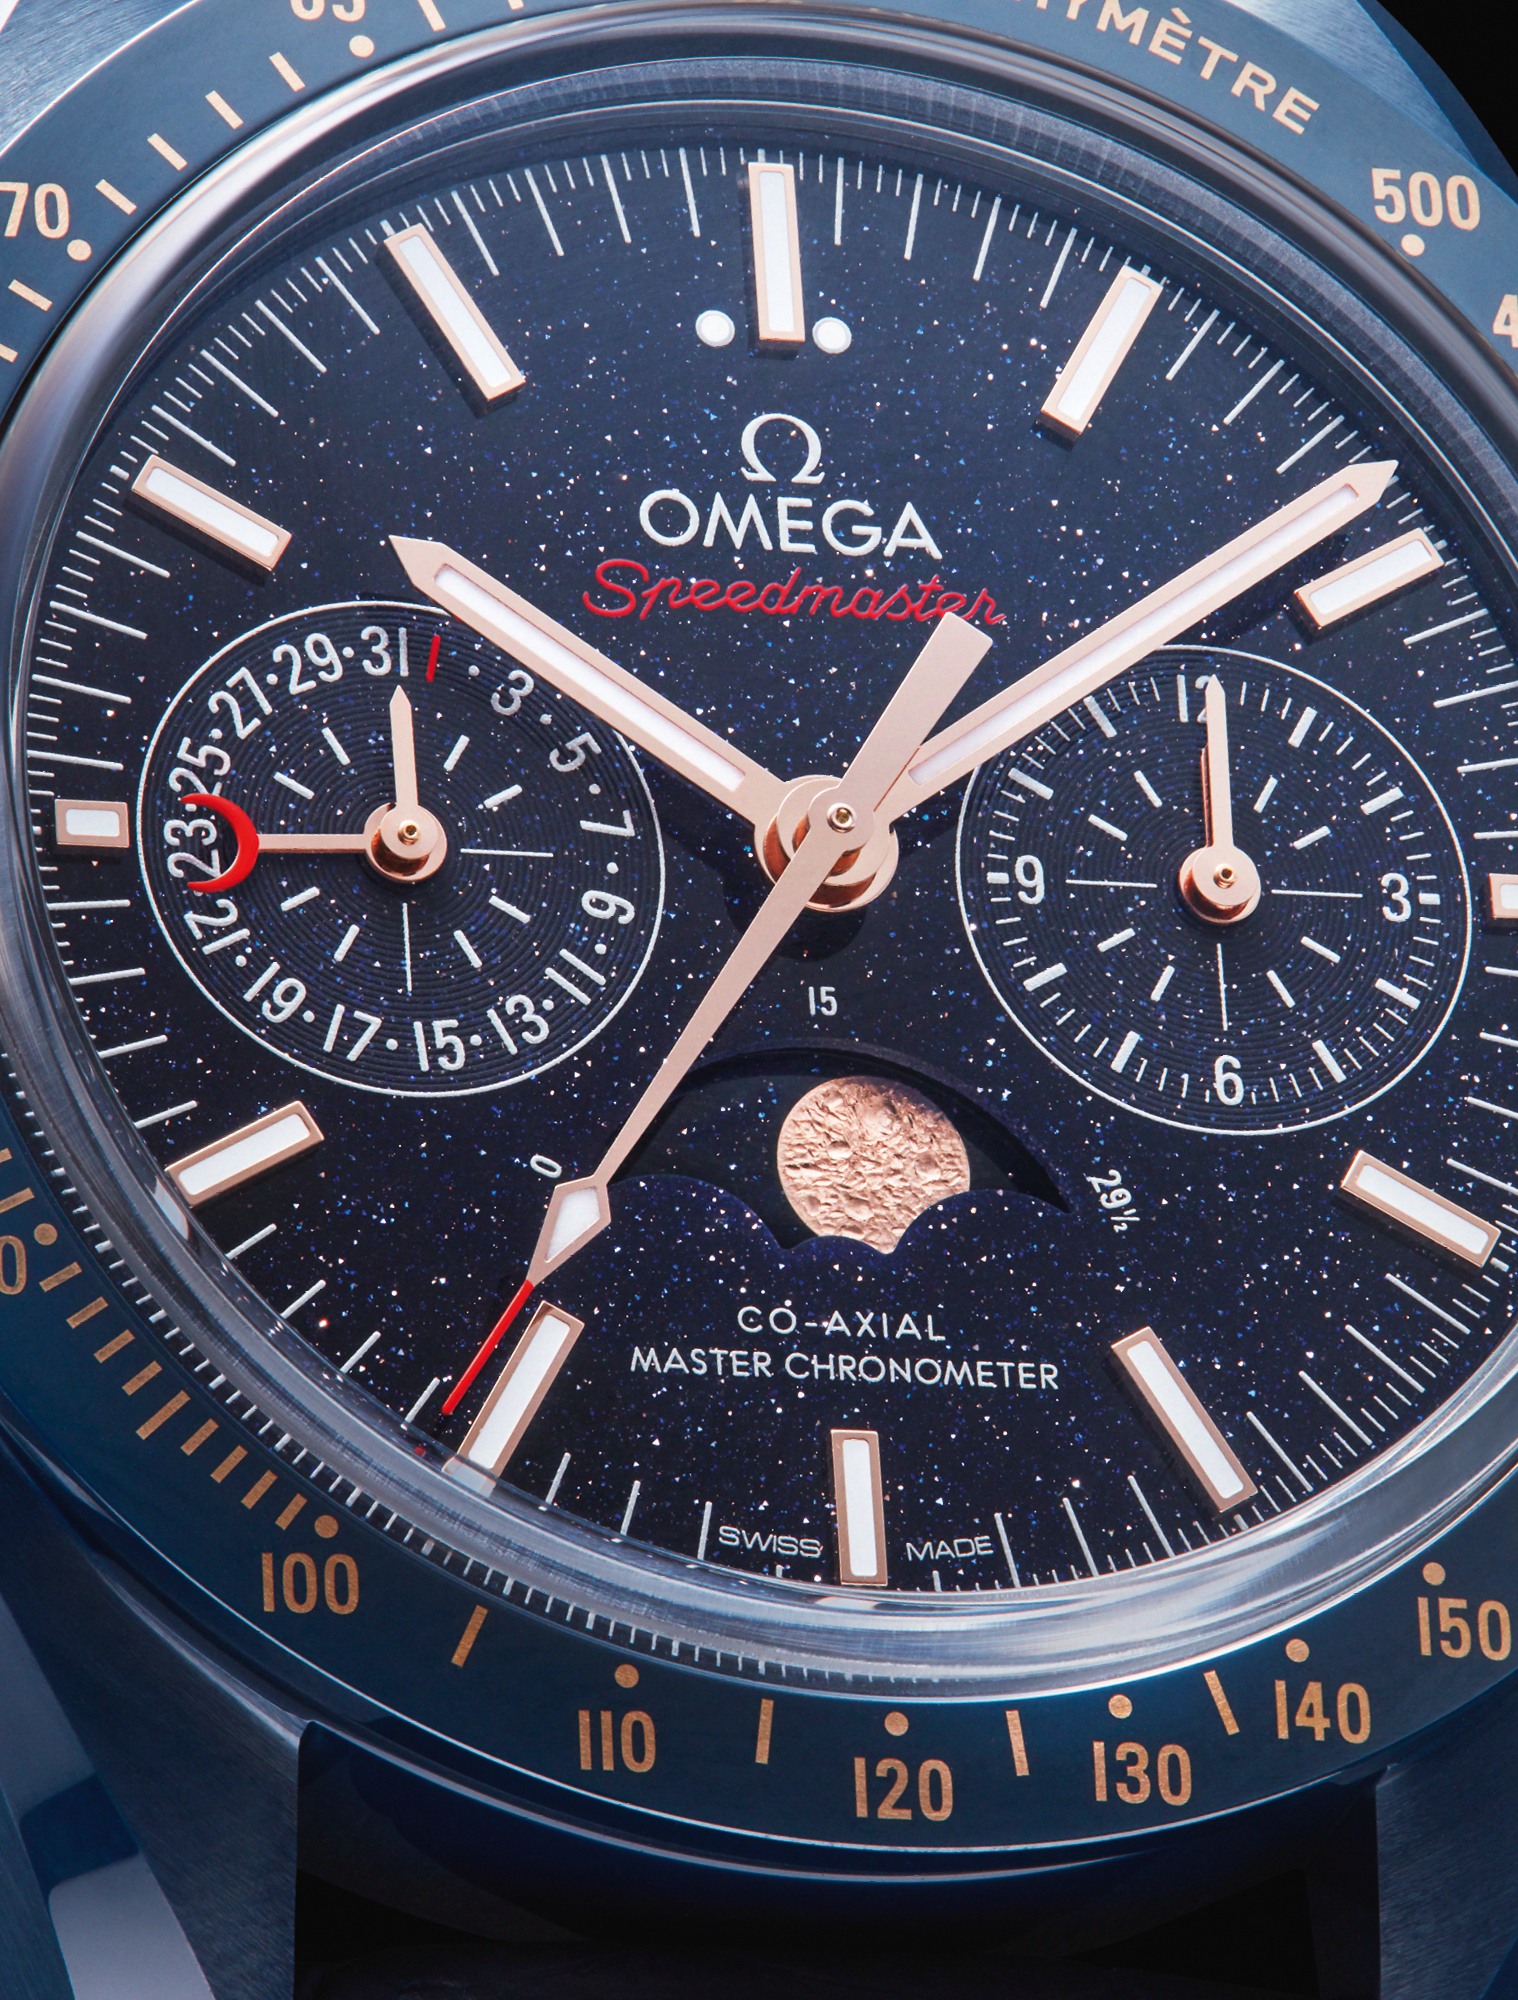 mega’s 44.25mm Speedmaster Moonwatch ‘Blue Side of the Moon’ is a Master Chronometer Moonphase Chronograph featuring a blue aventurine glass dial and blue ceramic case complemented by a blue ceramic bezel ring. £11,040, OMEGA